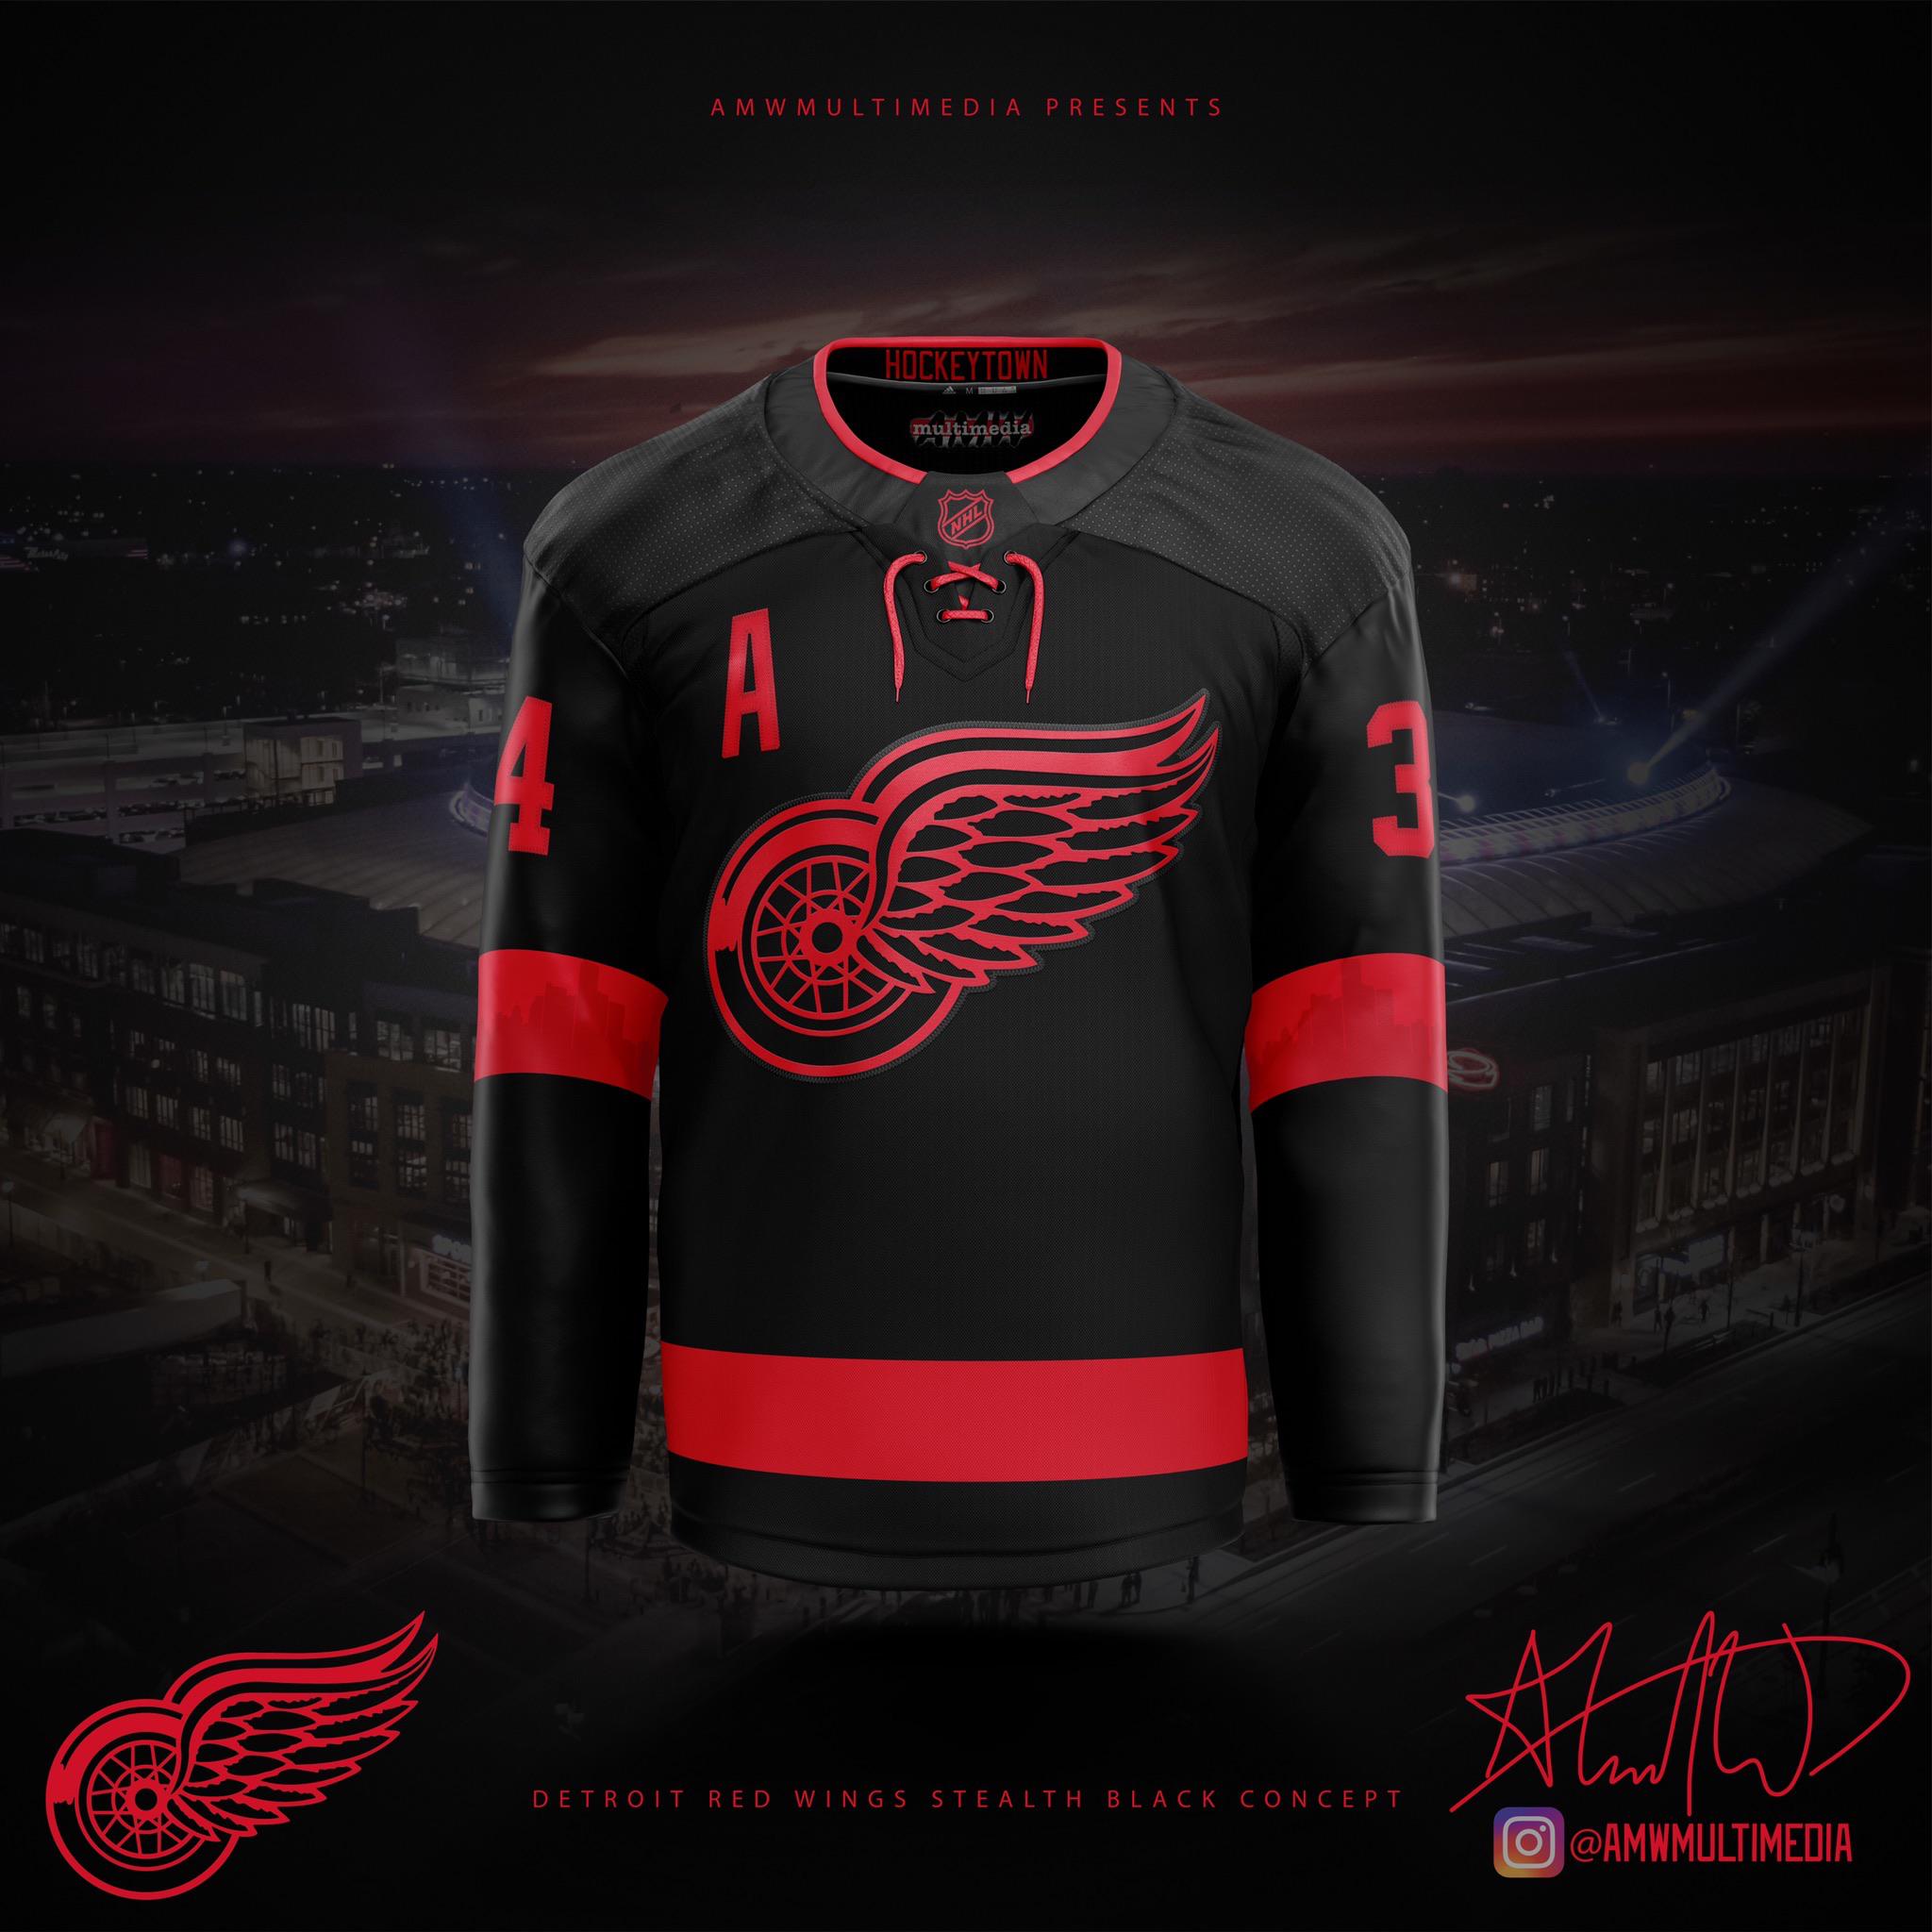 Detroit Red Wings 'Motor City' concept jersey honors history of city -  Detroit Sports Nation